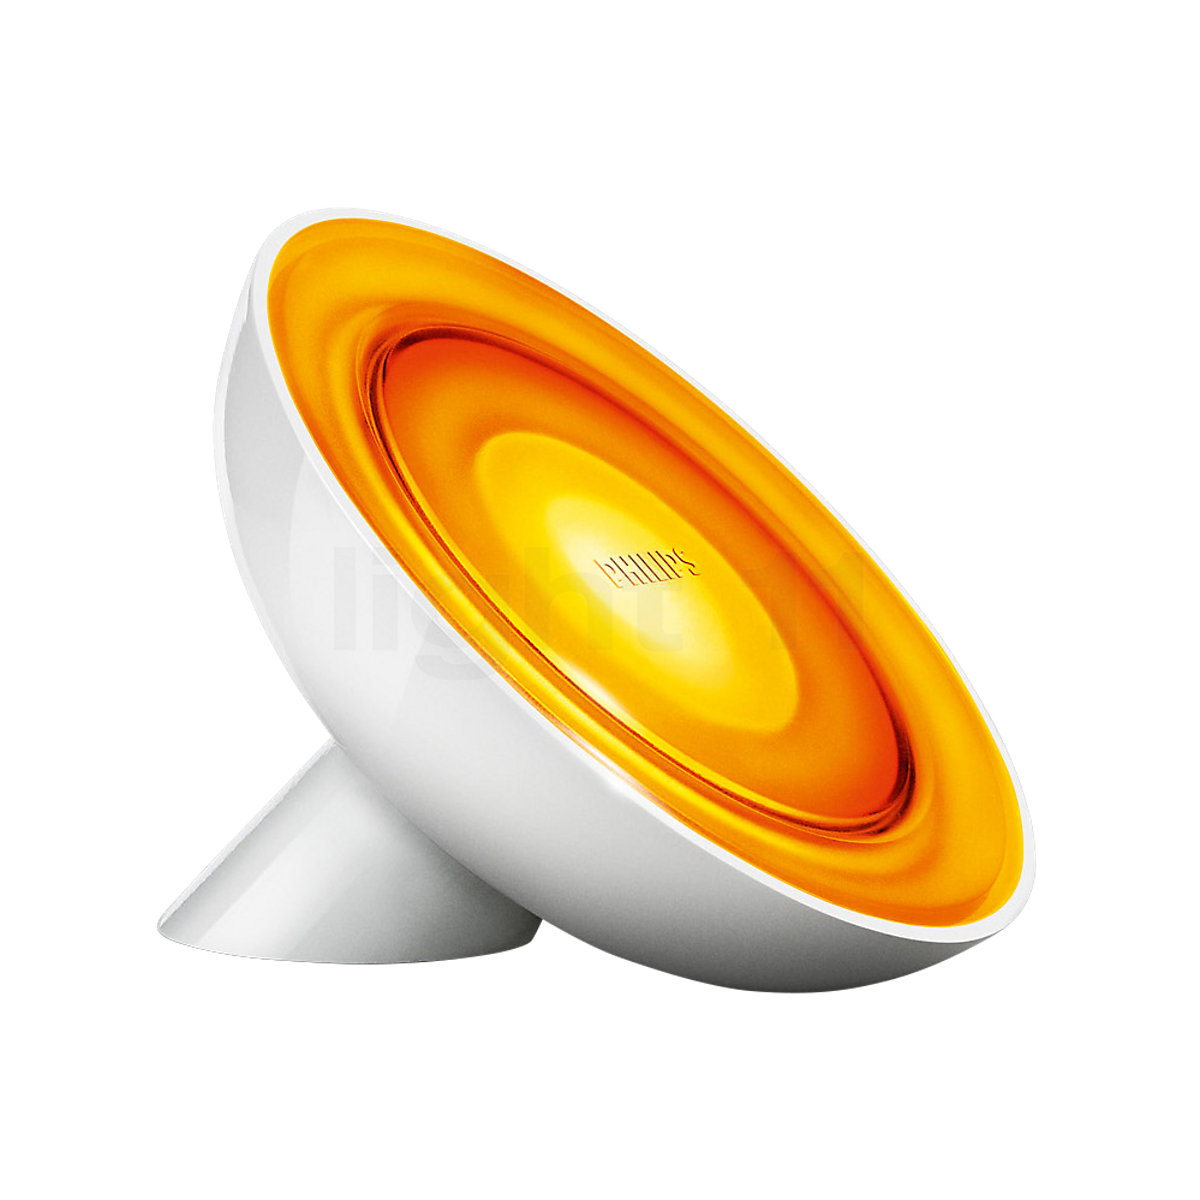 Philips Hue Bloom Table Lamp Led At, Philips Hue Bloom Dimmable Led Smart Table Lamp Review